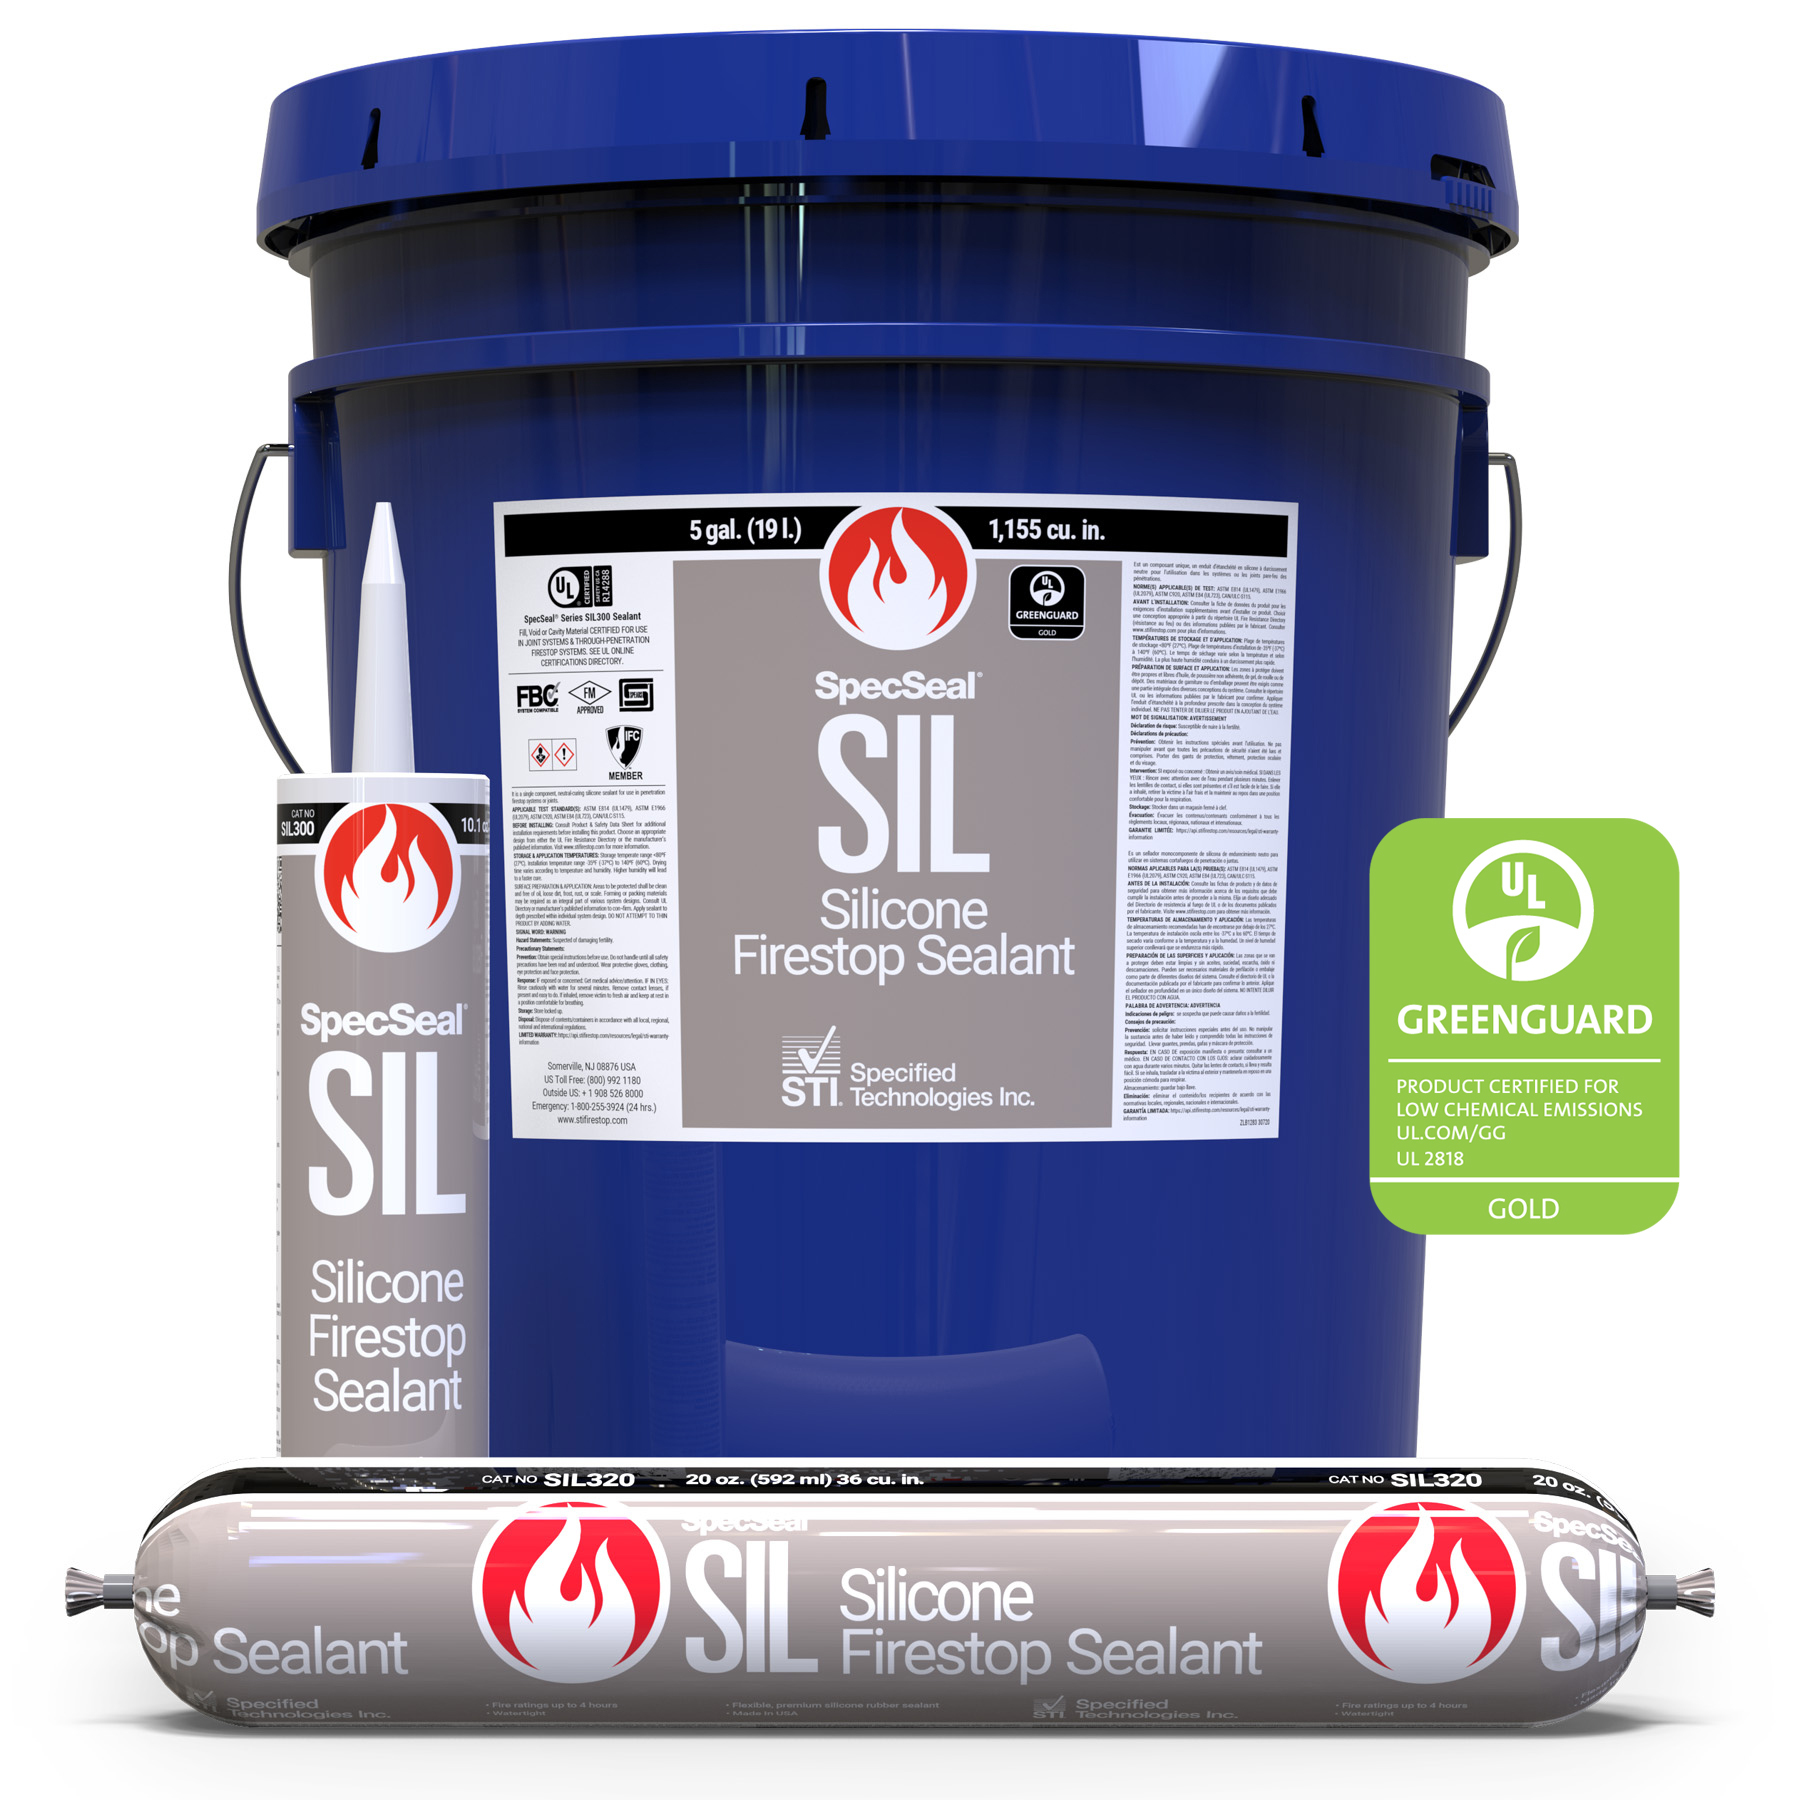 SpecSeal SIL Silicone Firestop Sealant